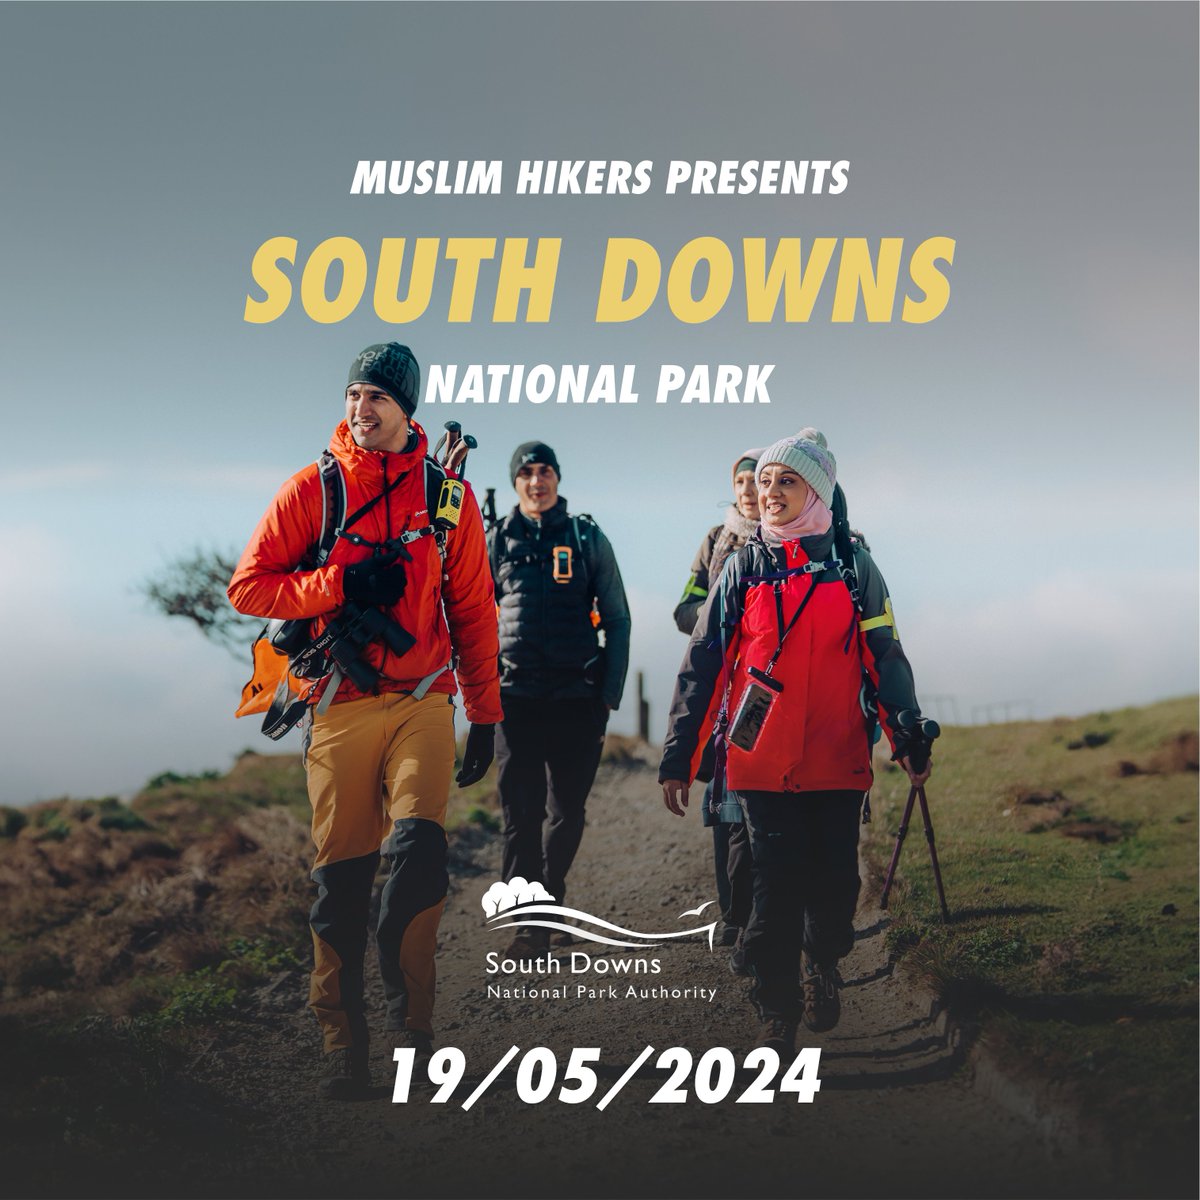 We're excited to welcome @Muslim_Hikers back to the South Downs on Sunday 19 May to help celebrate #NationalWalkingMonth All welcome regardless of religious background or ability. Limited spaces, so hurry, don't miss out >> eventbrite.co.uk/e/muslim-hiker…